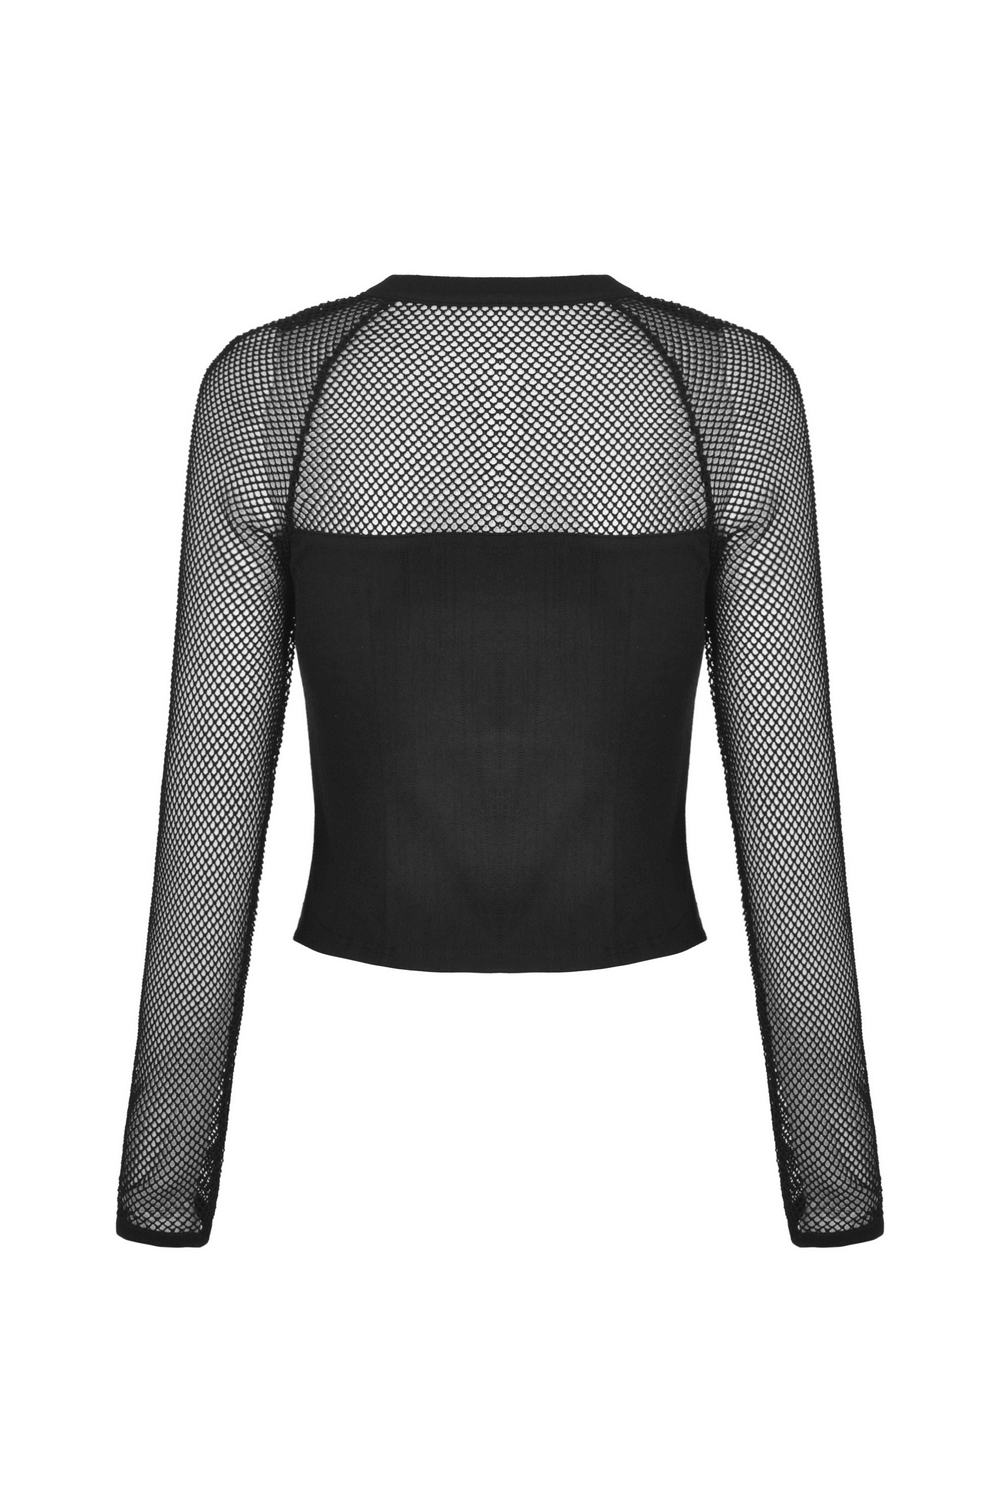 Gothic Black Zipper Mesh Top with Studded Detail